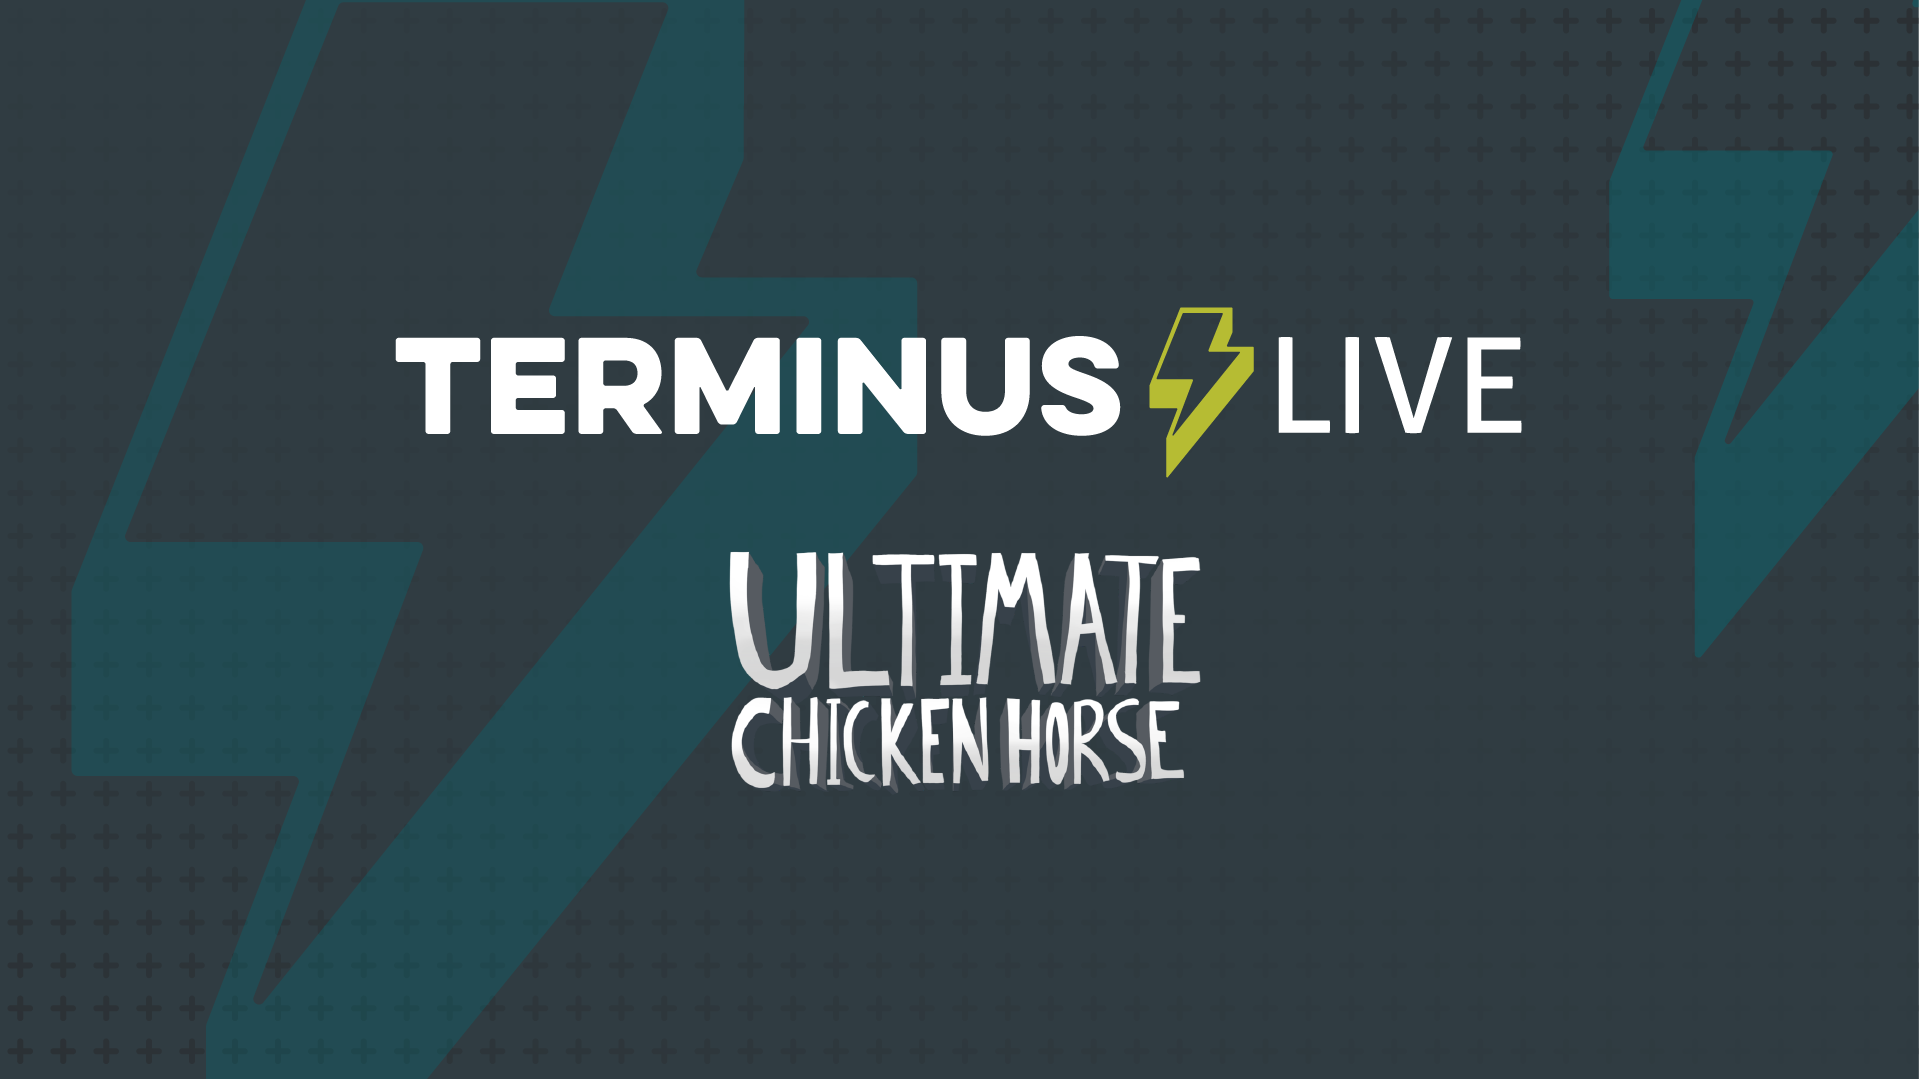 TERMINUS Live: Dylan & Cory play Ultimate Chicken Horse